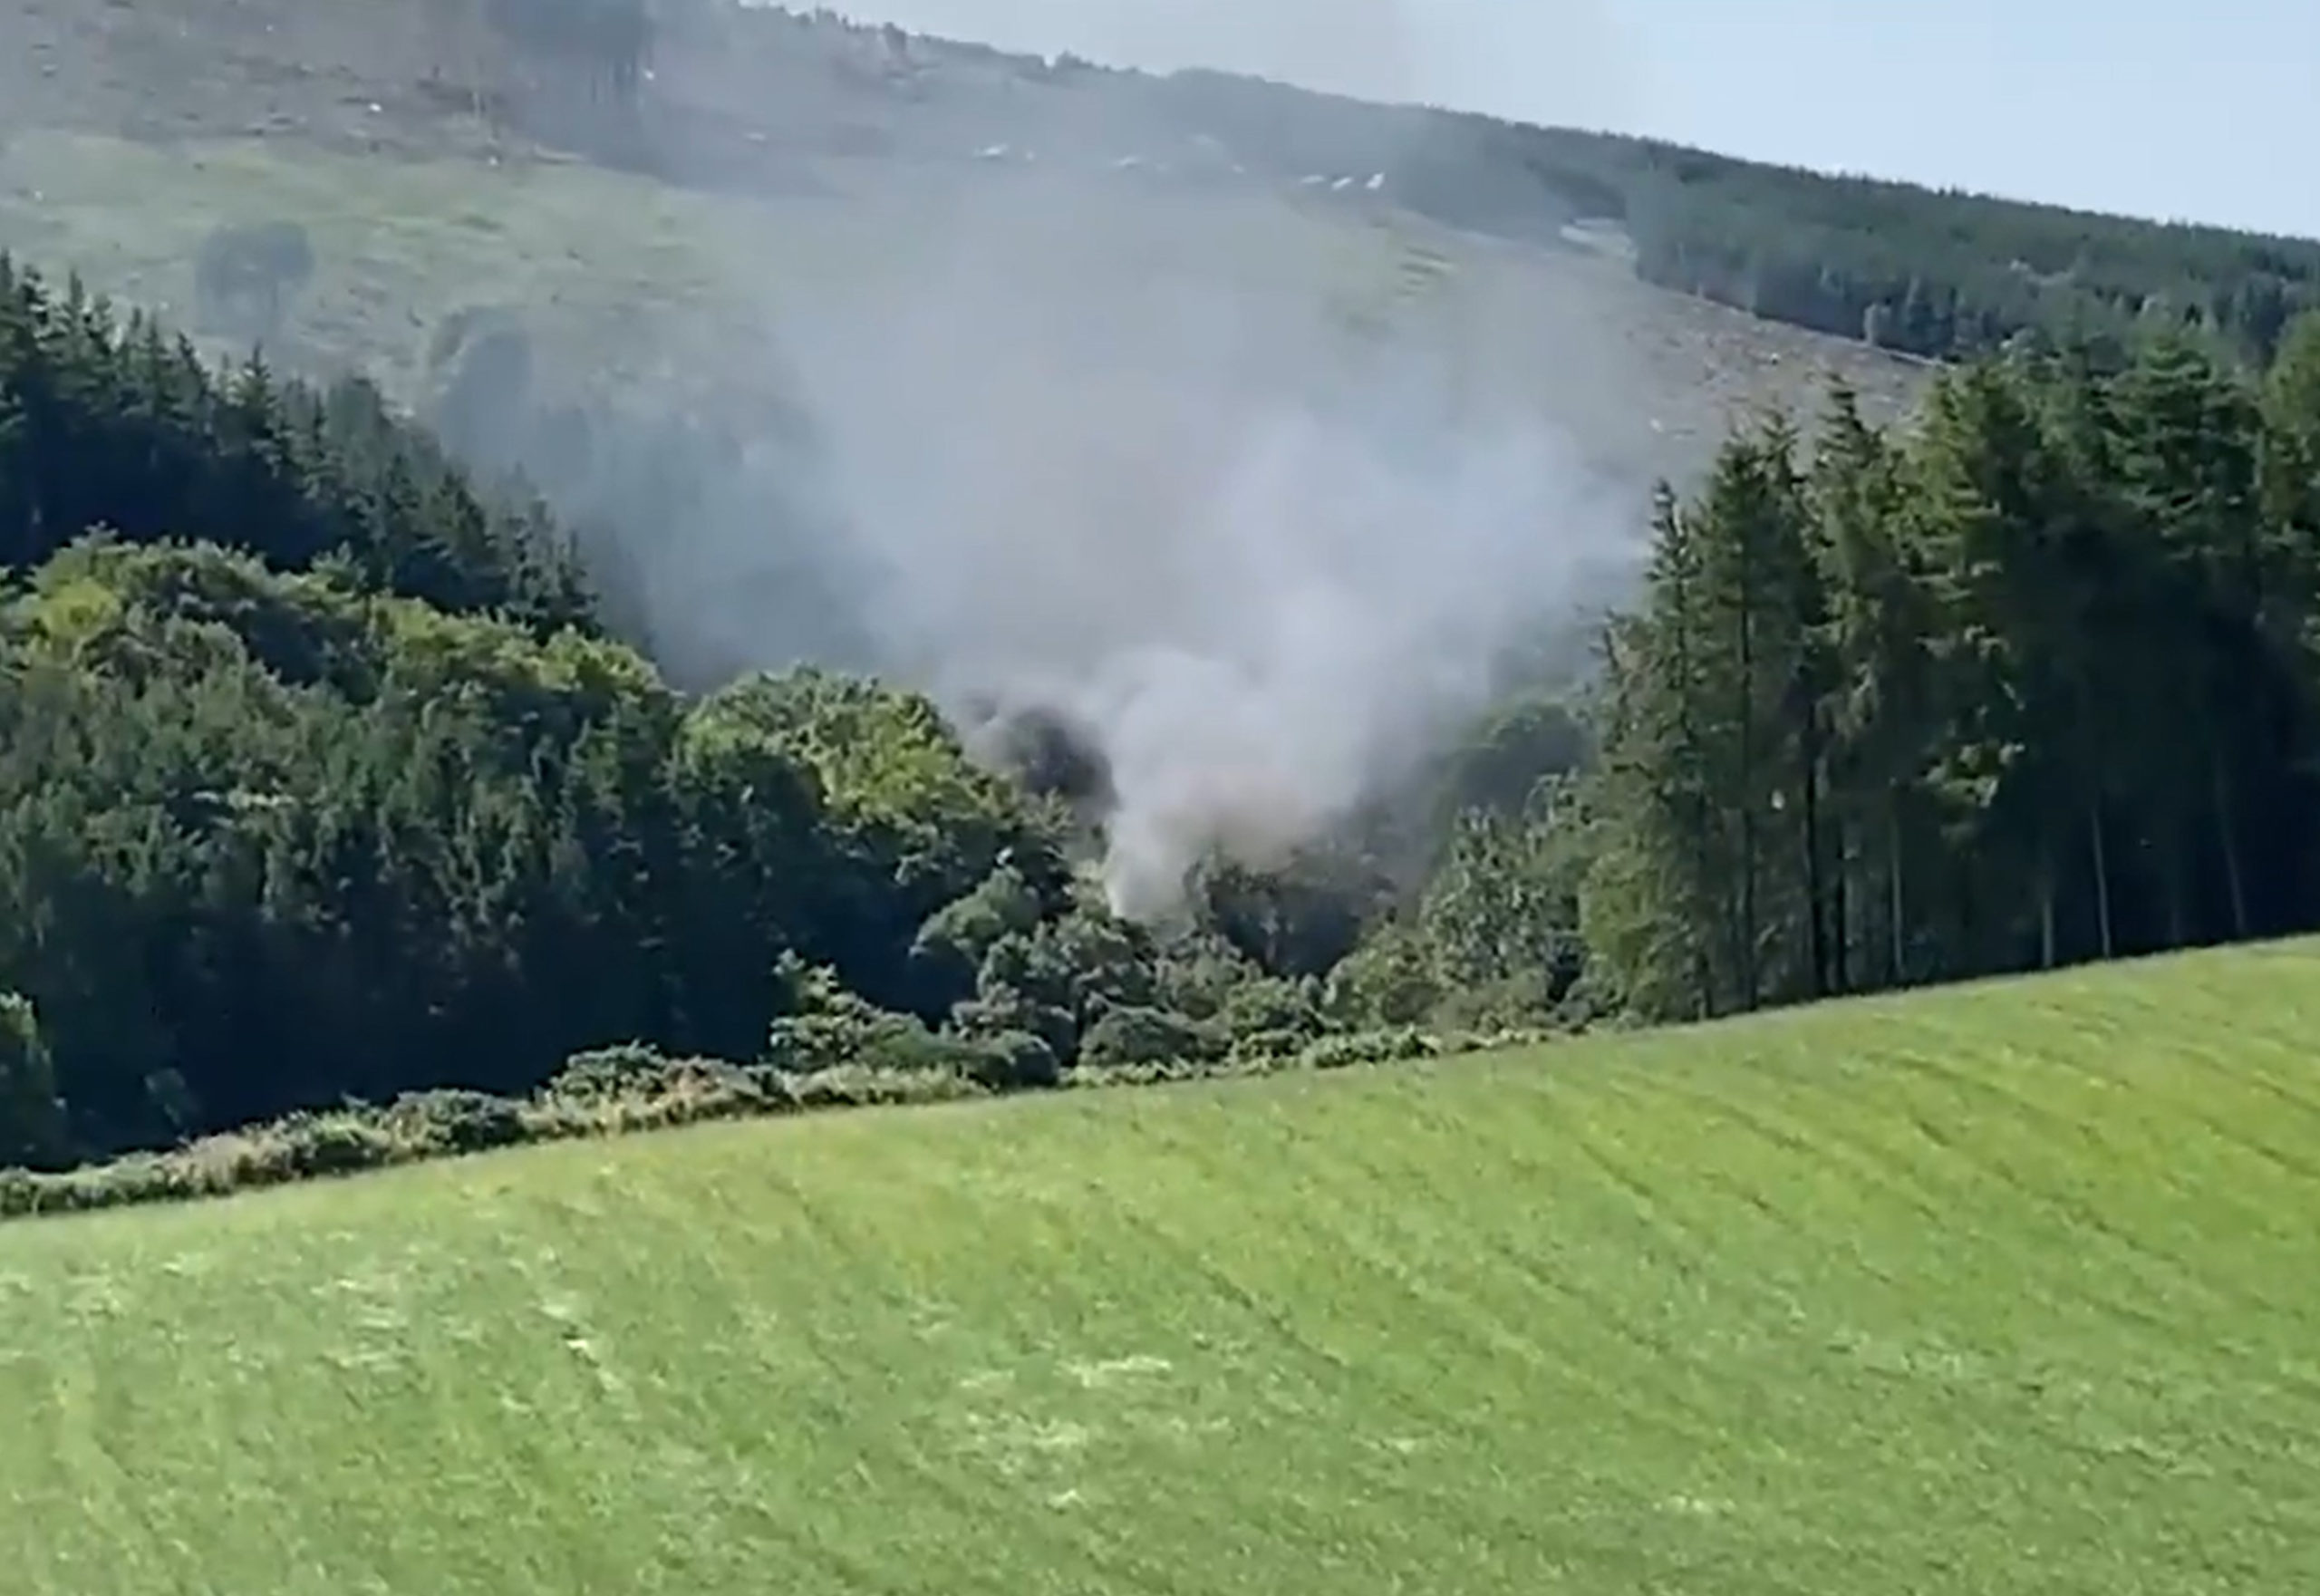 Smoke billowing from the train near Stonehaven, Aberdeenshire